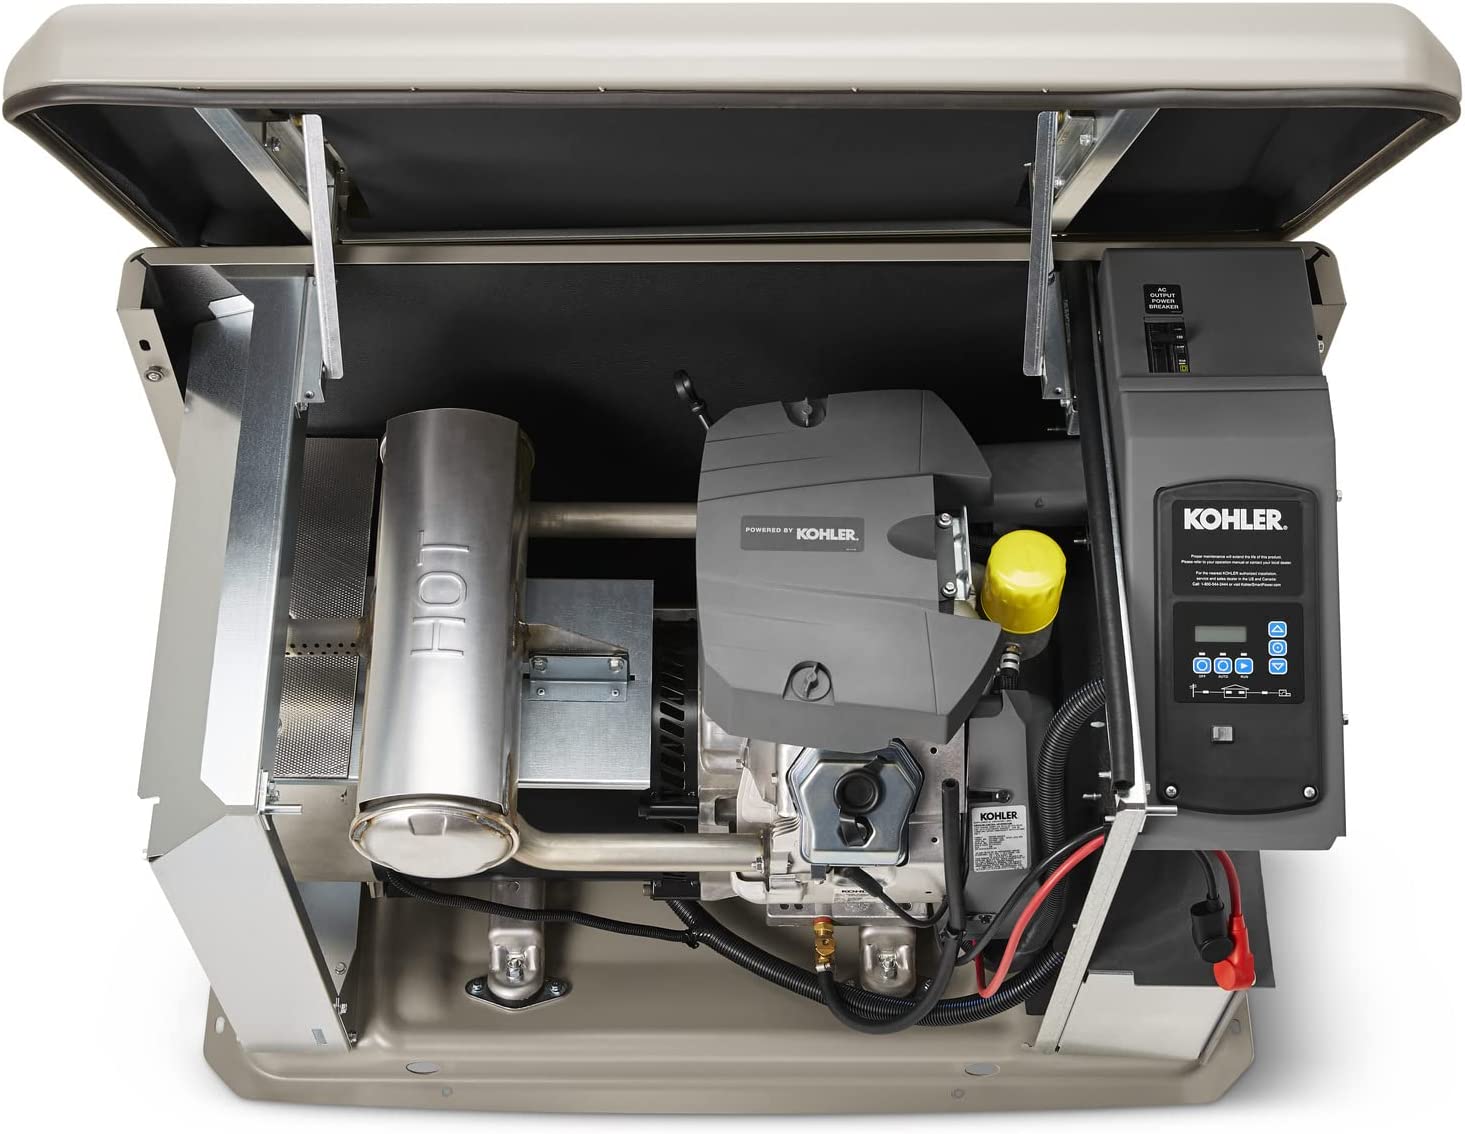 Interconnect venskab kit Kohler 20RCAL-200SELS Air-Cooled Standby Generator with 200 Amp Transf